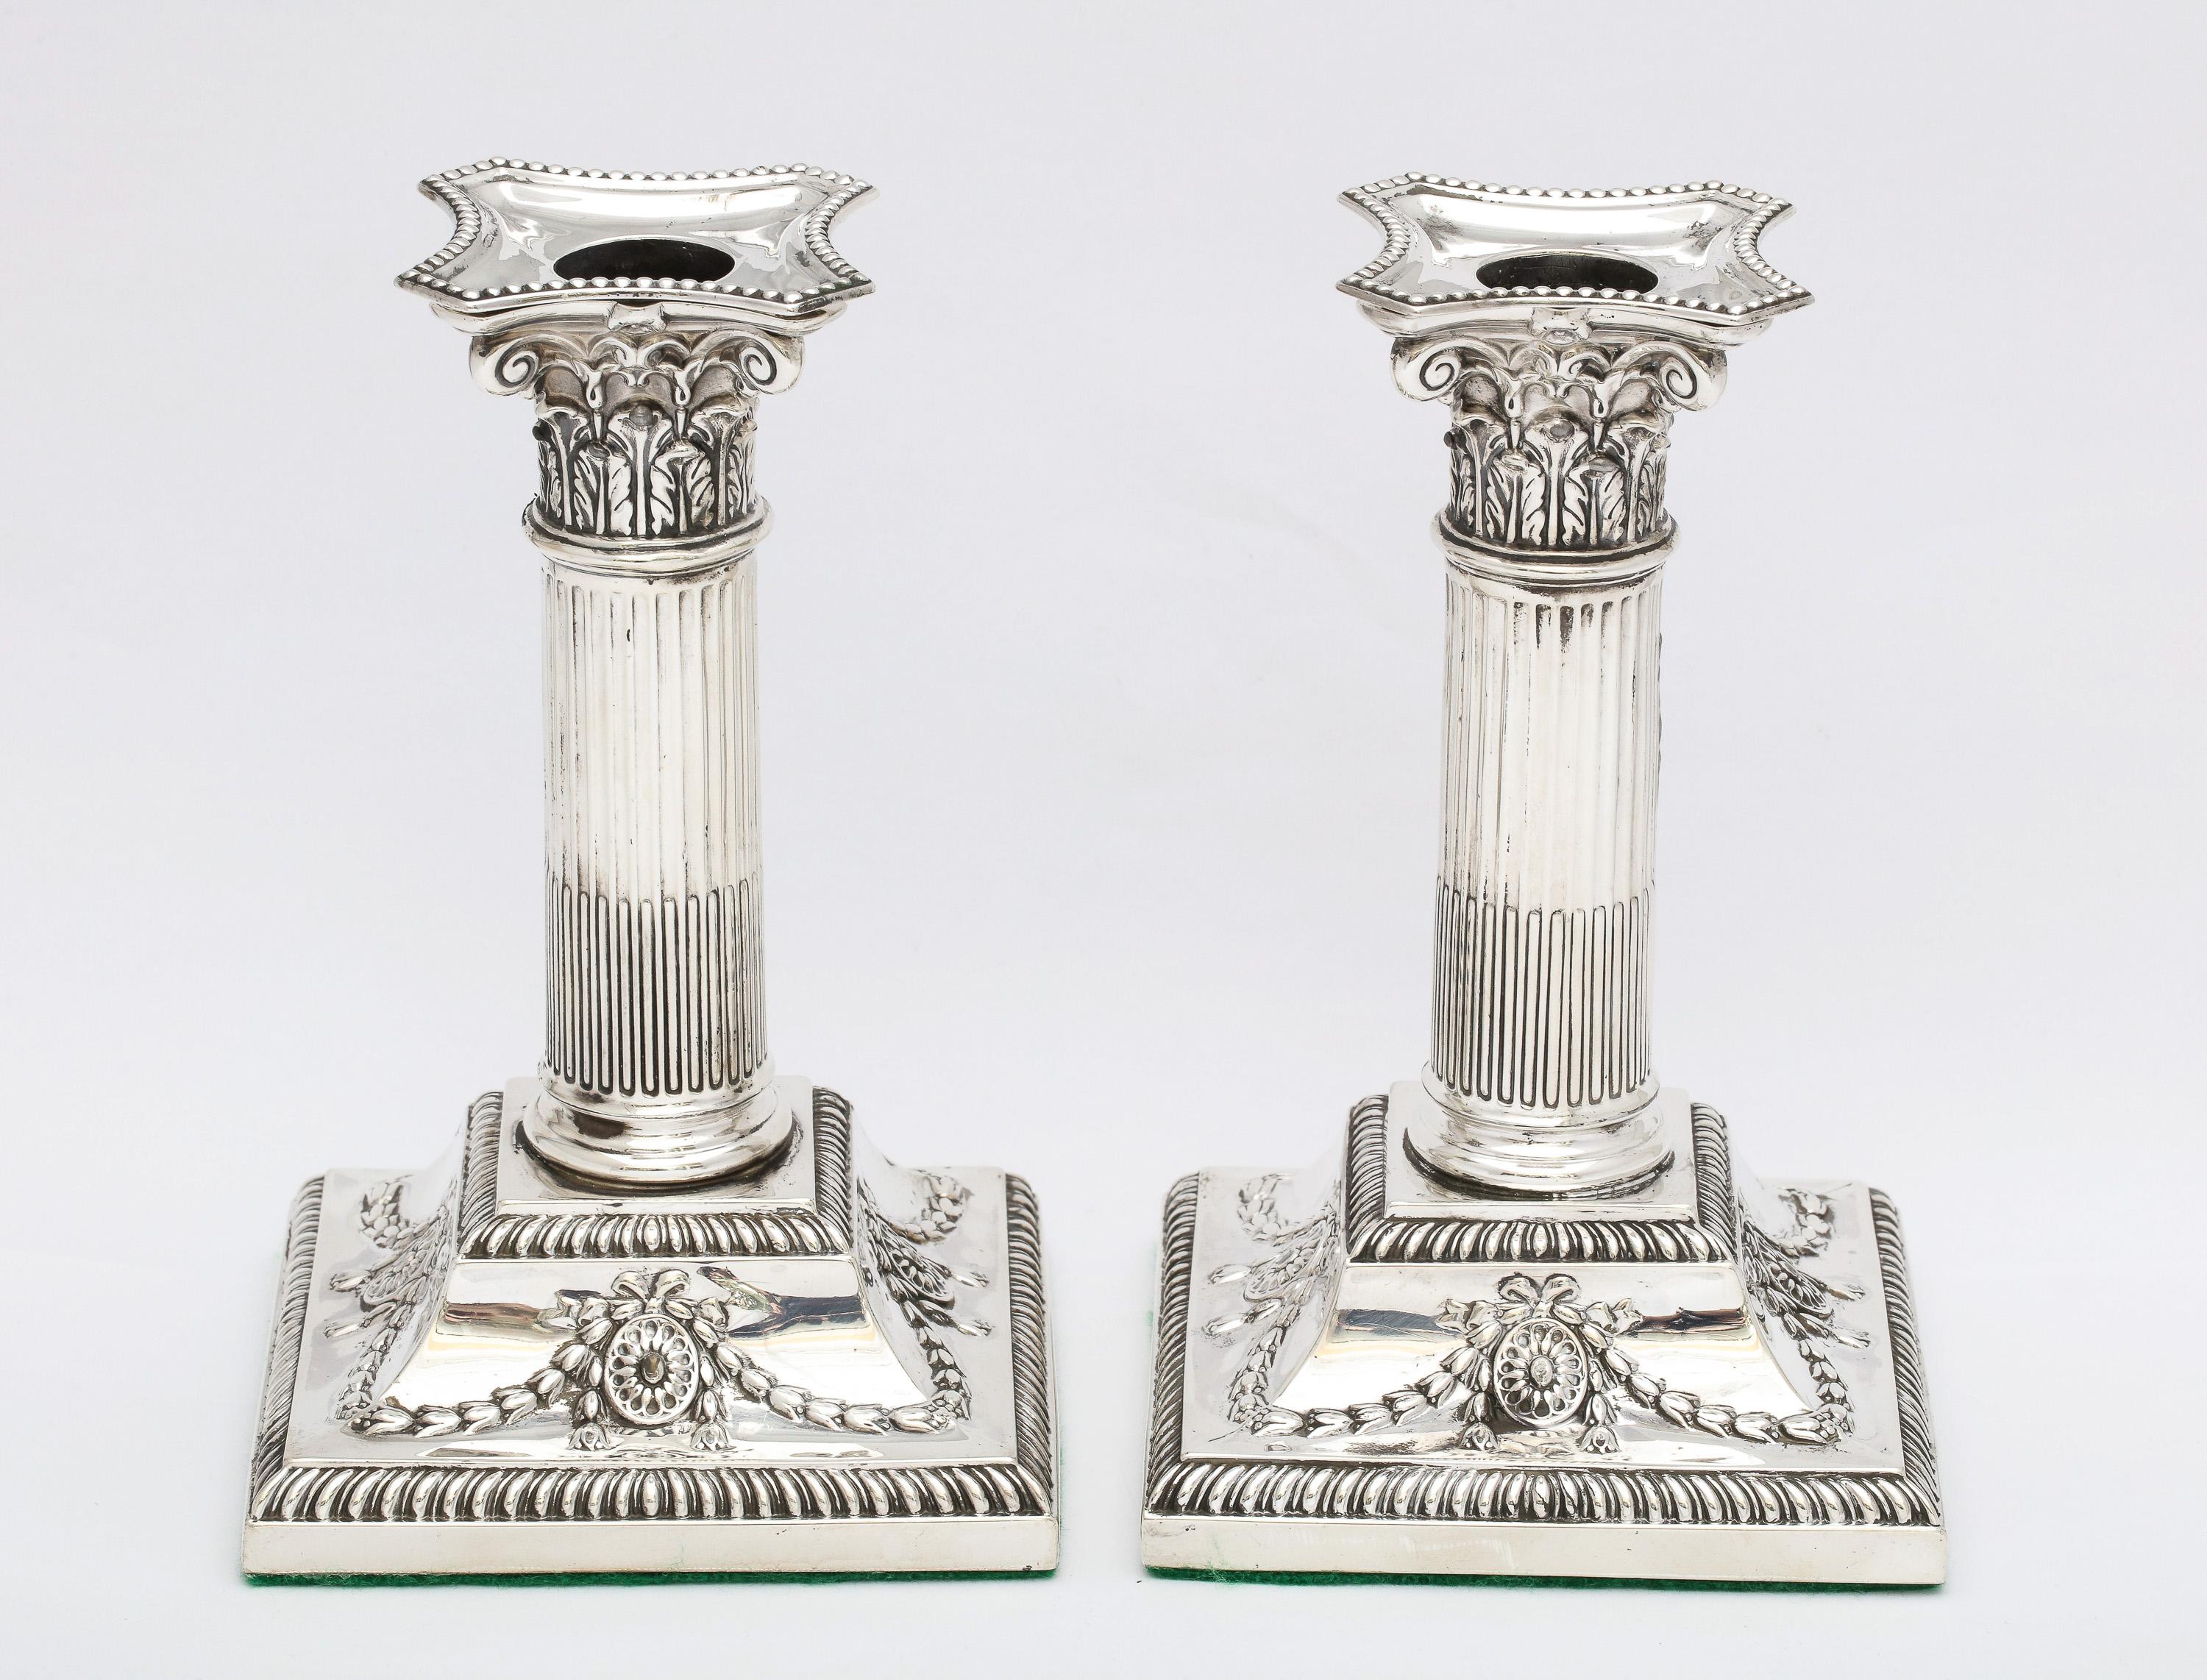 Beautiful pair of Victorian Period, neoclassical-style, sterling silver Corinthian column candlesticks, made in the city of Sheffield, England, year-hallmarked for 1898, Hawksworth, Eyre and Co., Ltd.- makers. Base of each candlestick is decorated